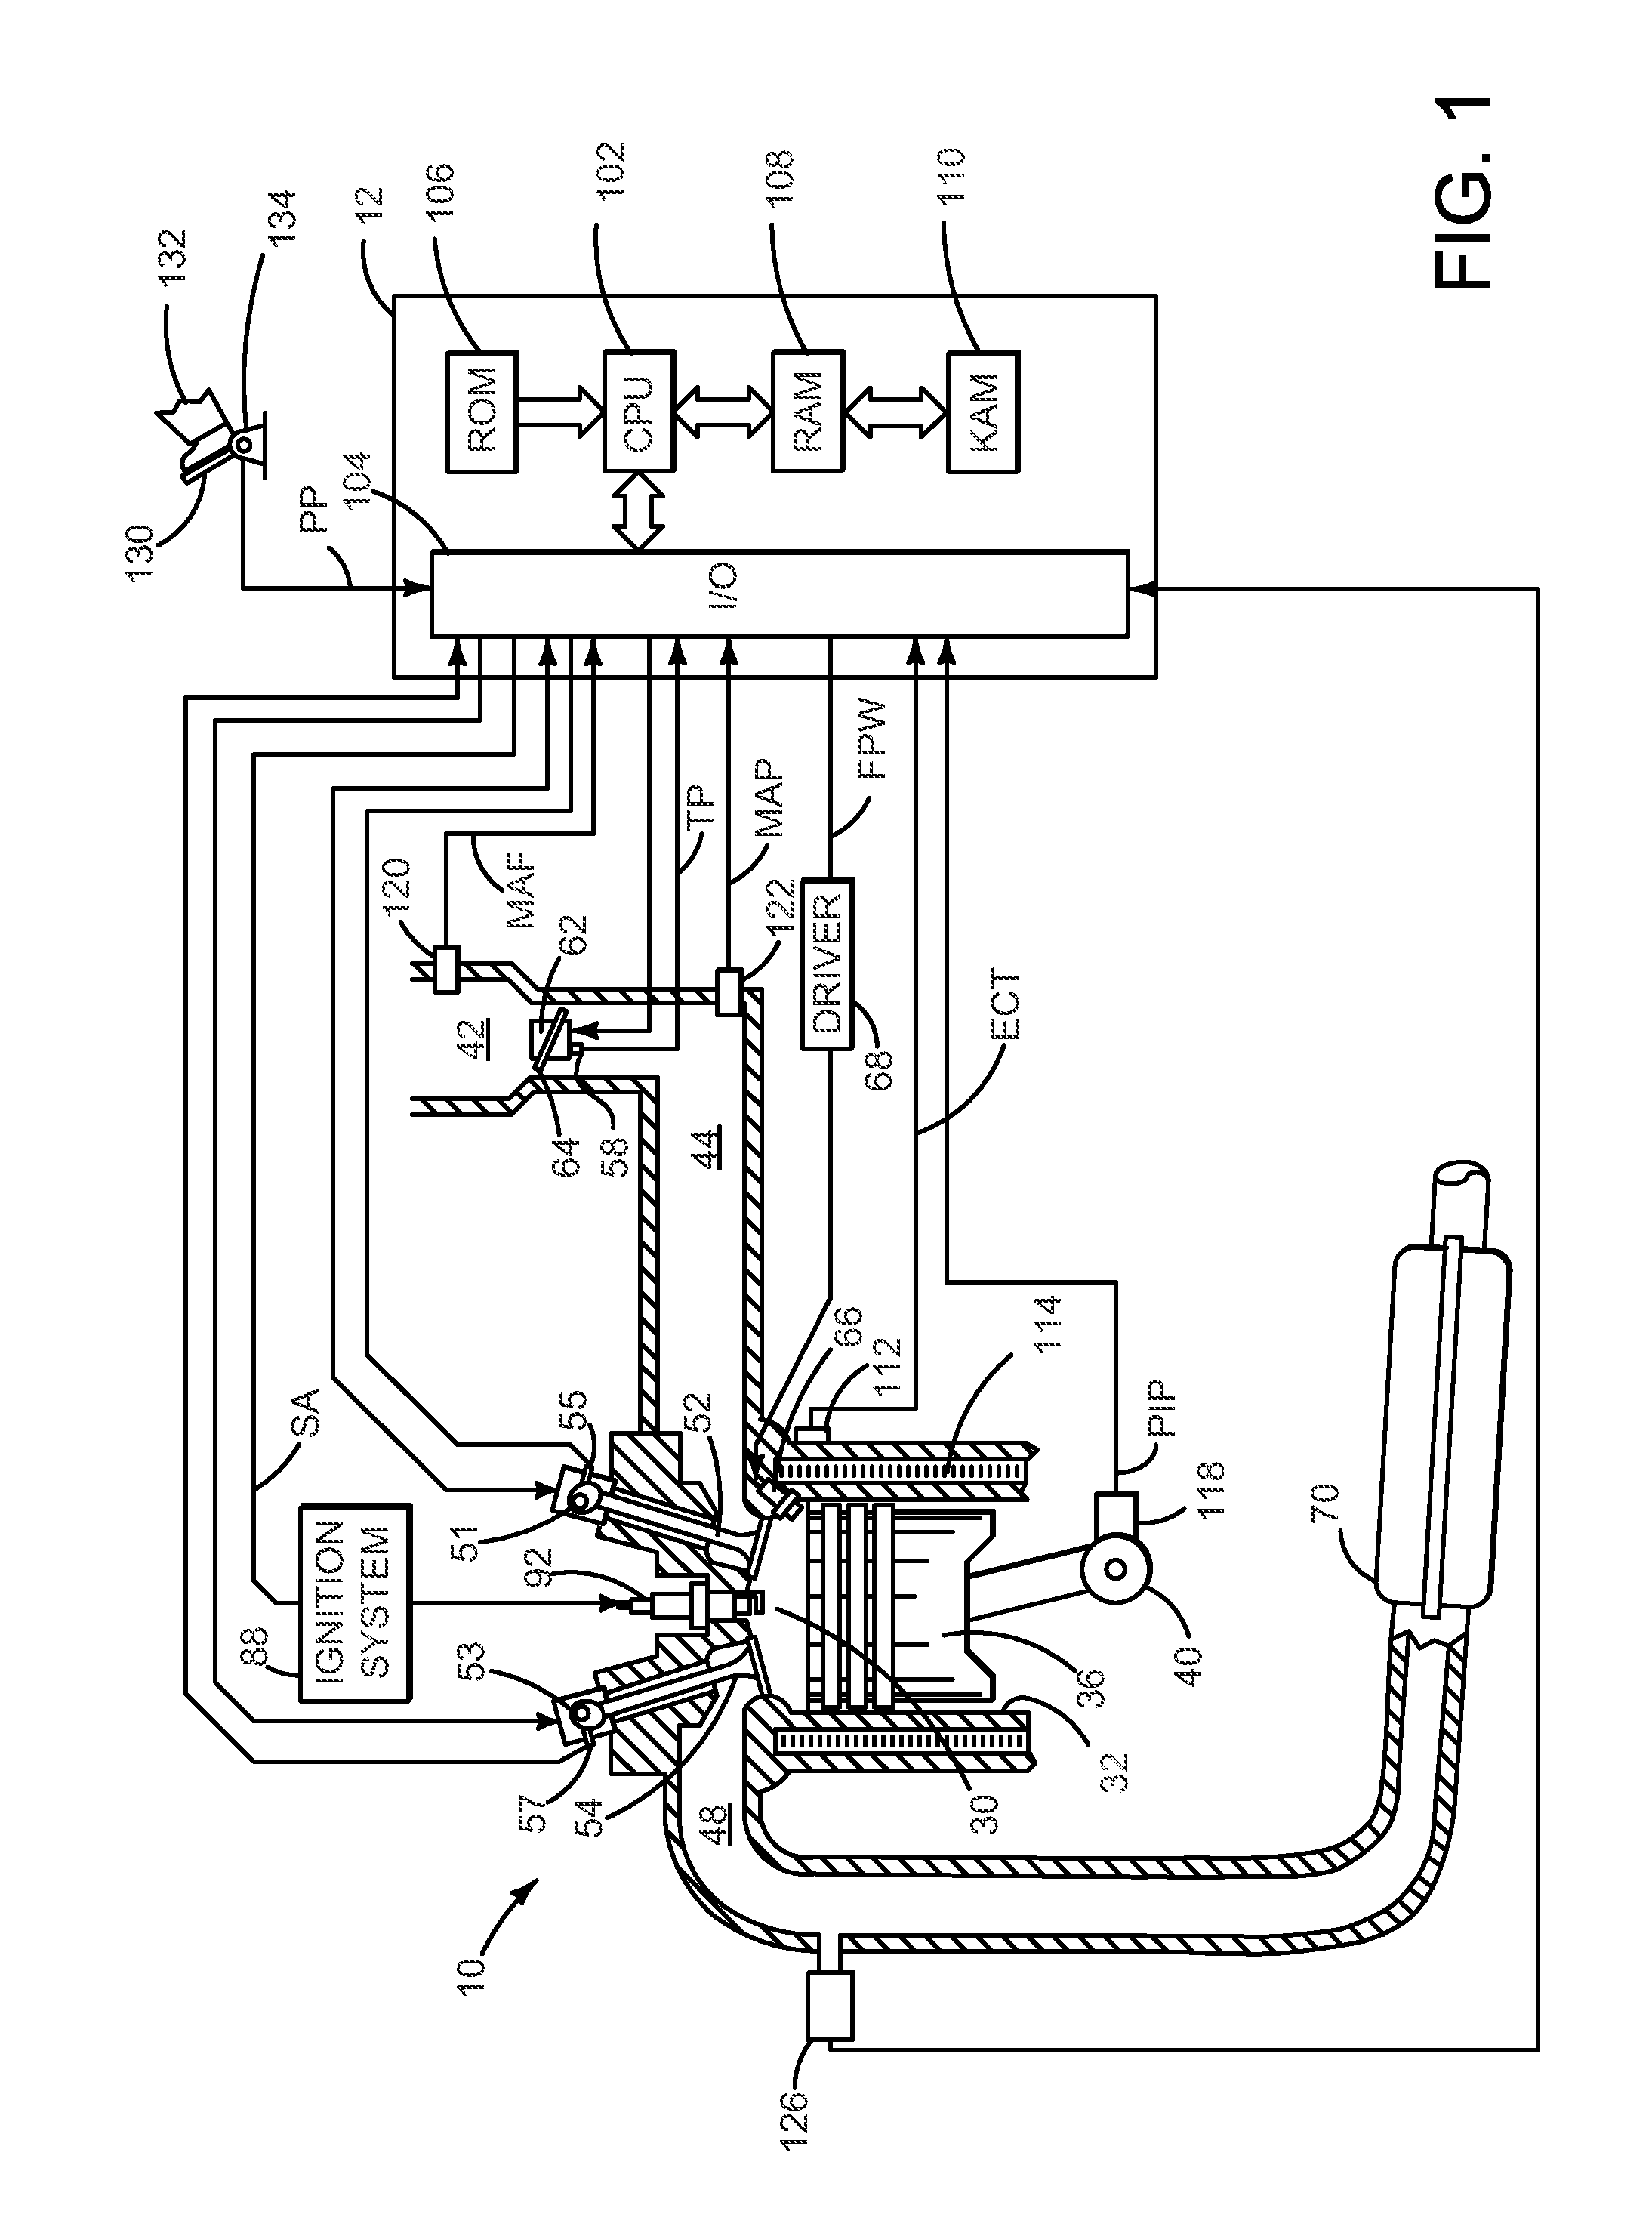 System and method for monitoring an ignition system